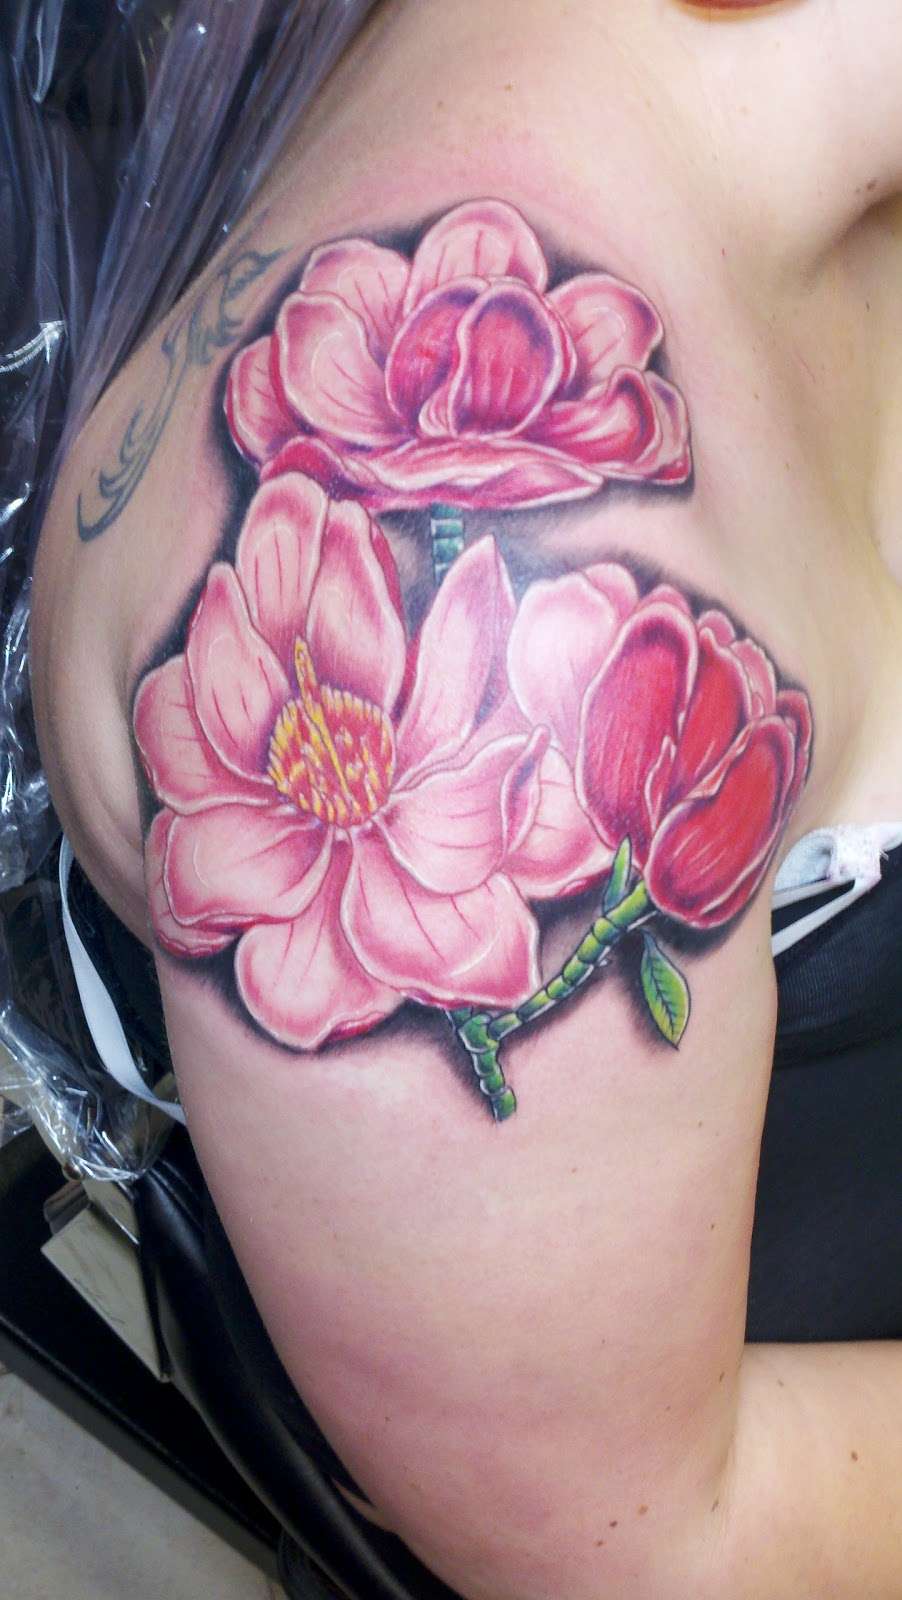 Empire Tattoo | 2176 W Foothill Blvd #A, Upland, CA 91786, USA | Phone: (909) 985-8889